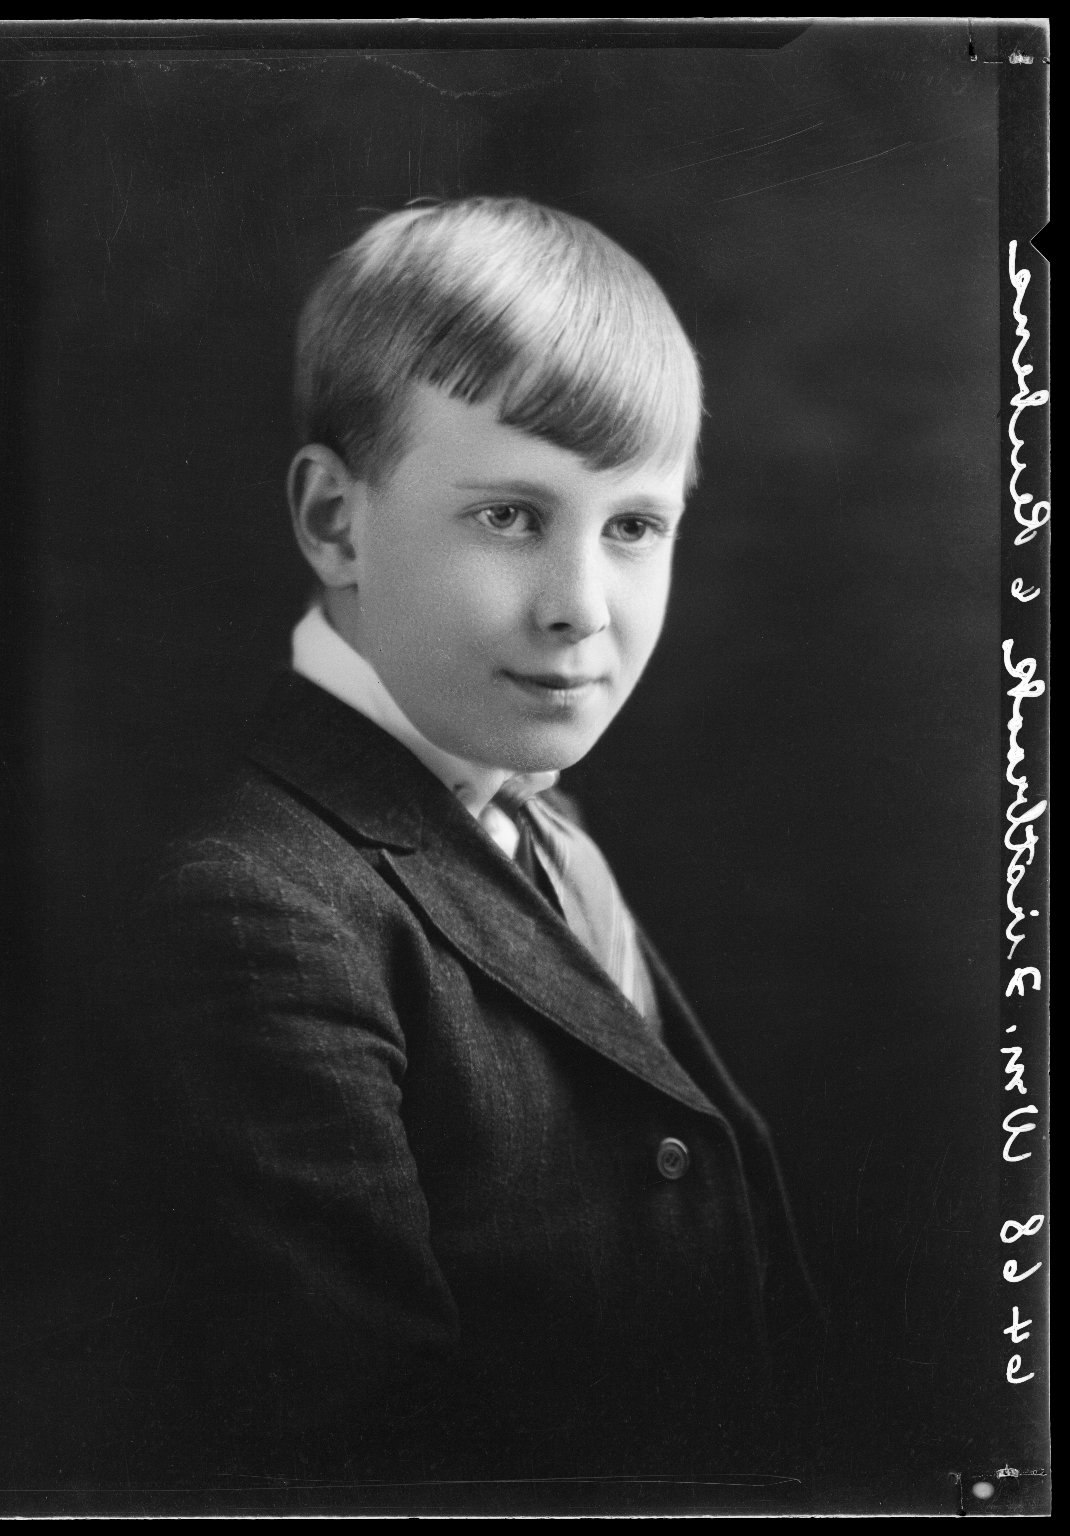 Portraits of son of Mrs. William Firstbrook